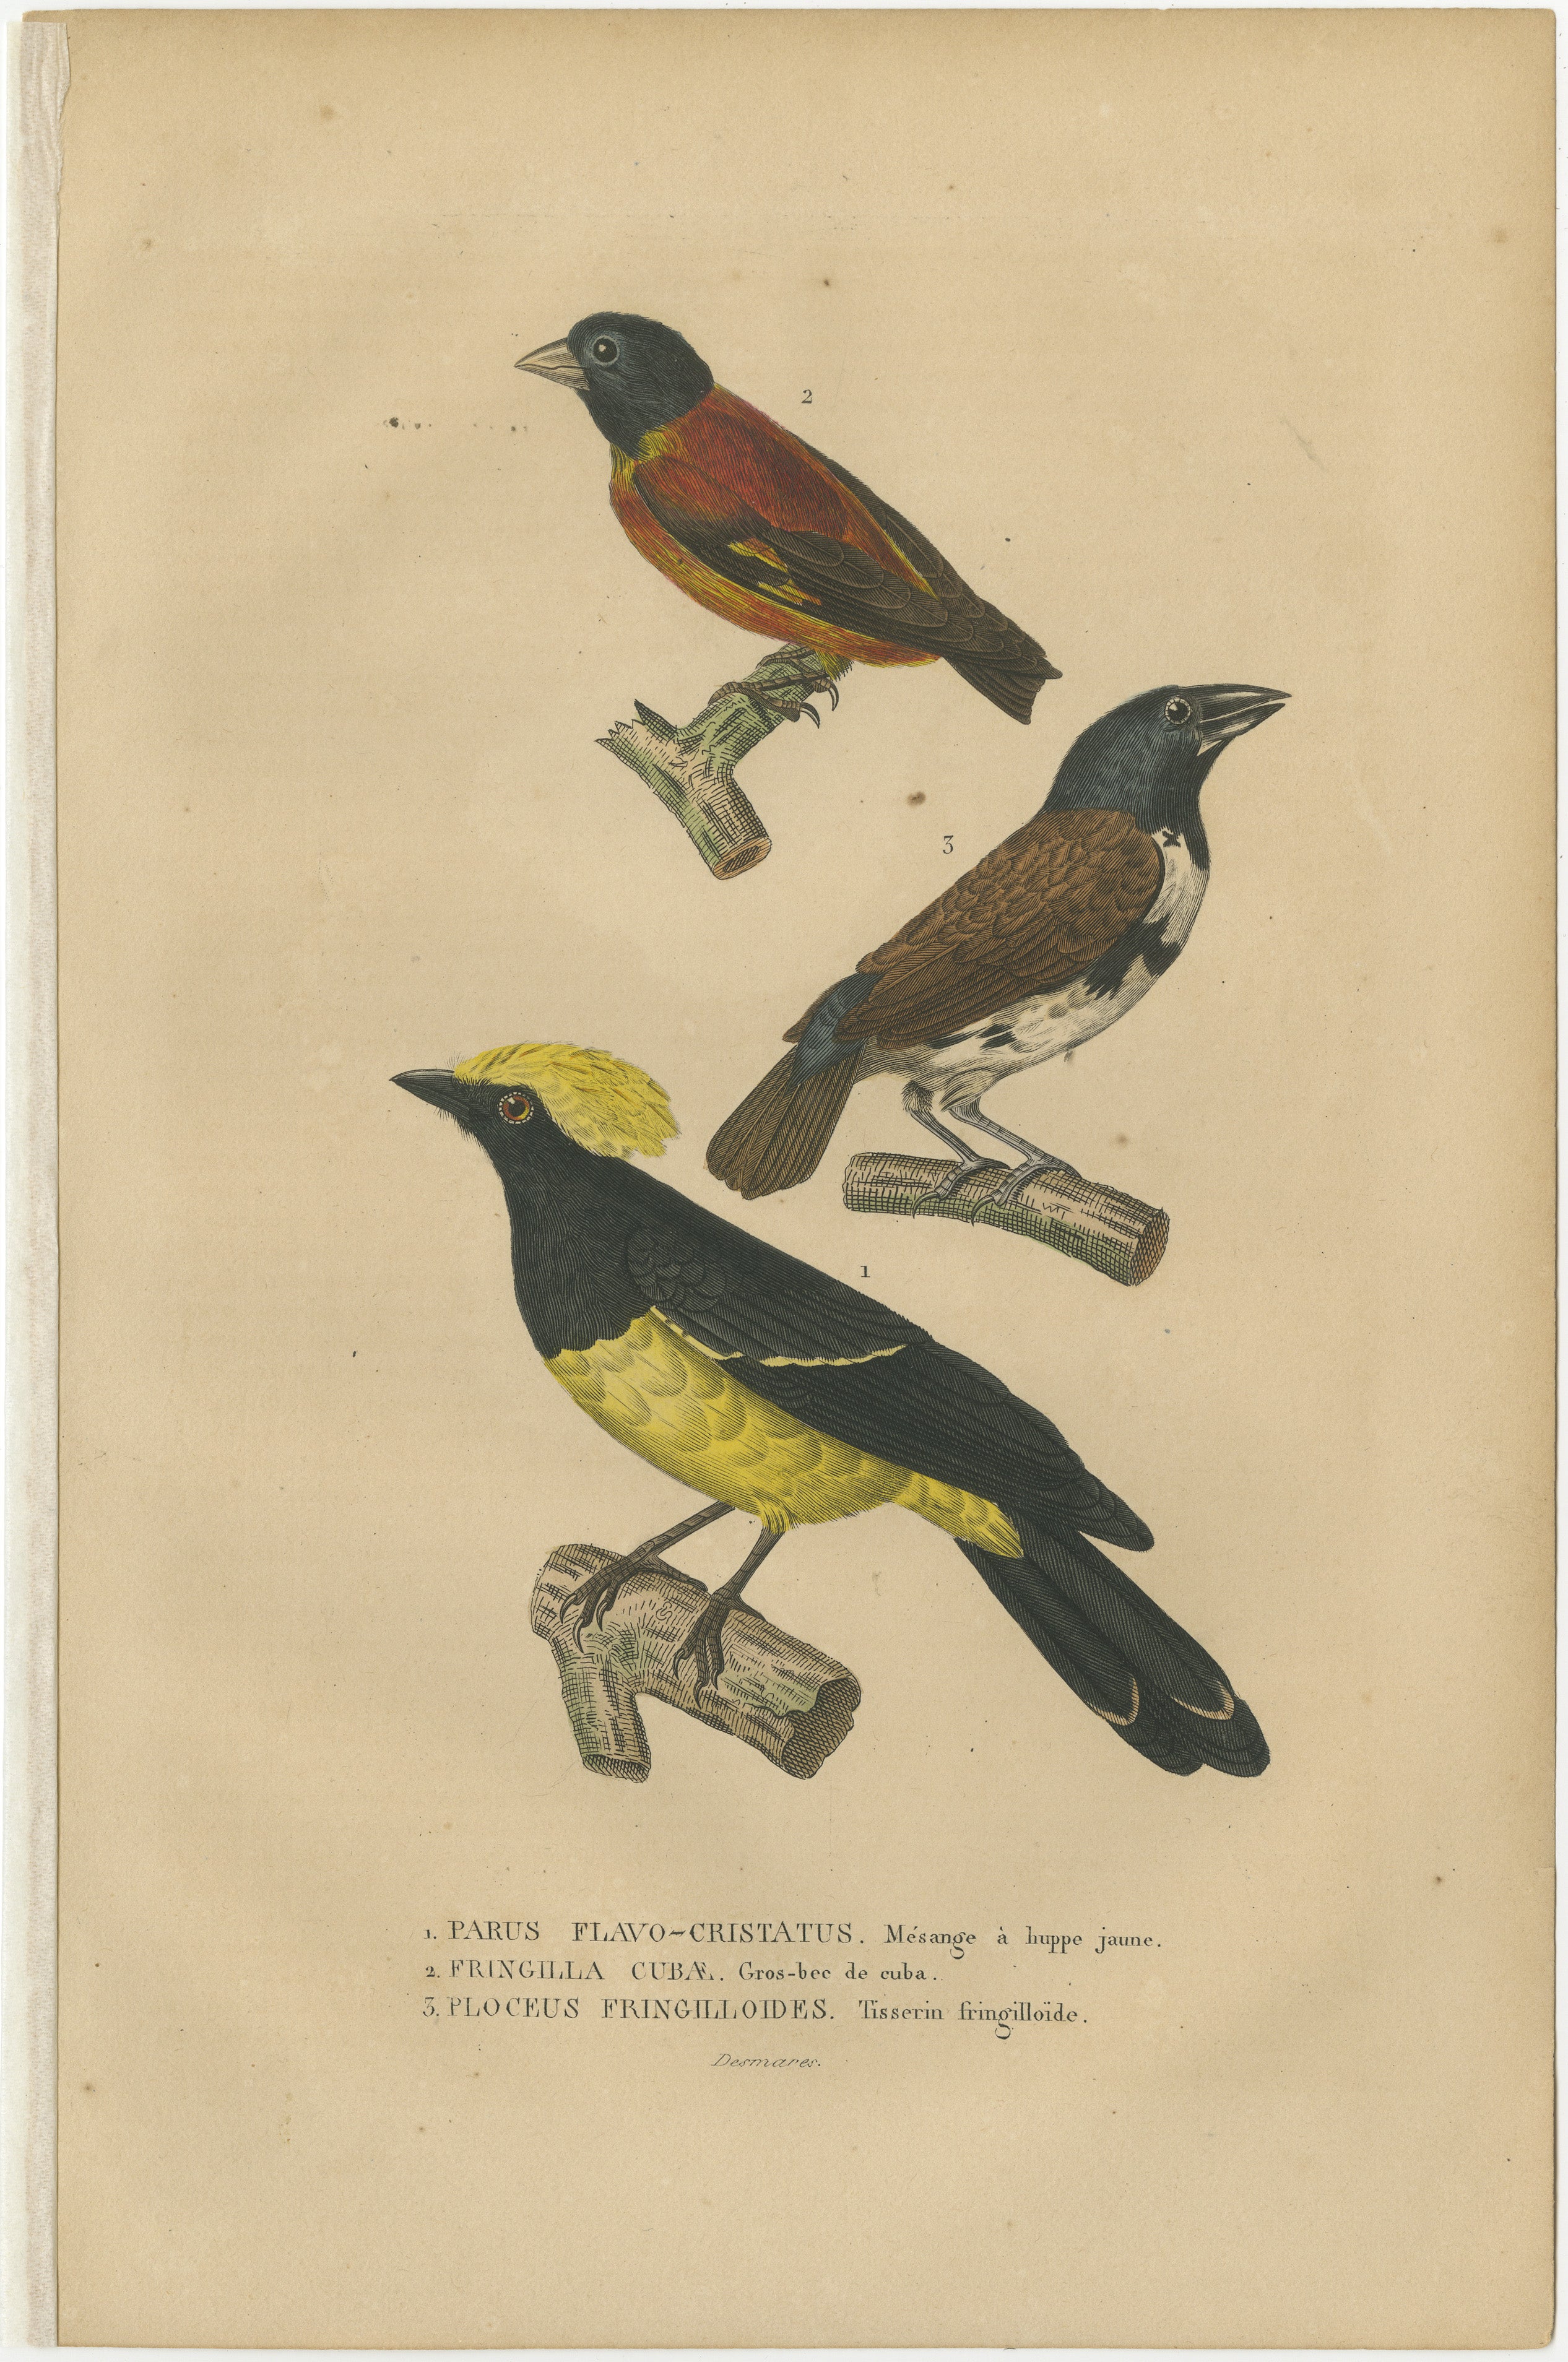 Title: ‘1. PICUCULE A BEC EN COIN, 2. DICEE A PLASTRON, 3. TICHODROME ECHELETTE.’– (1. Woodcreeper, 2. Flowerpecker, 3. Wallcreeper.)

Indulge in the allure of avian elegance with this captivating original hand-colored print from the 19th century,